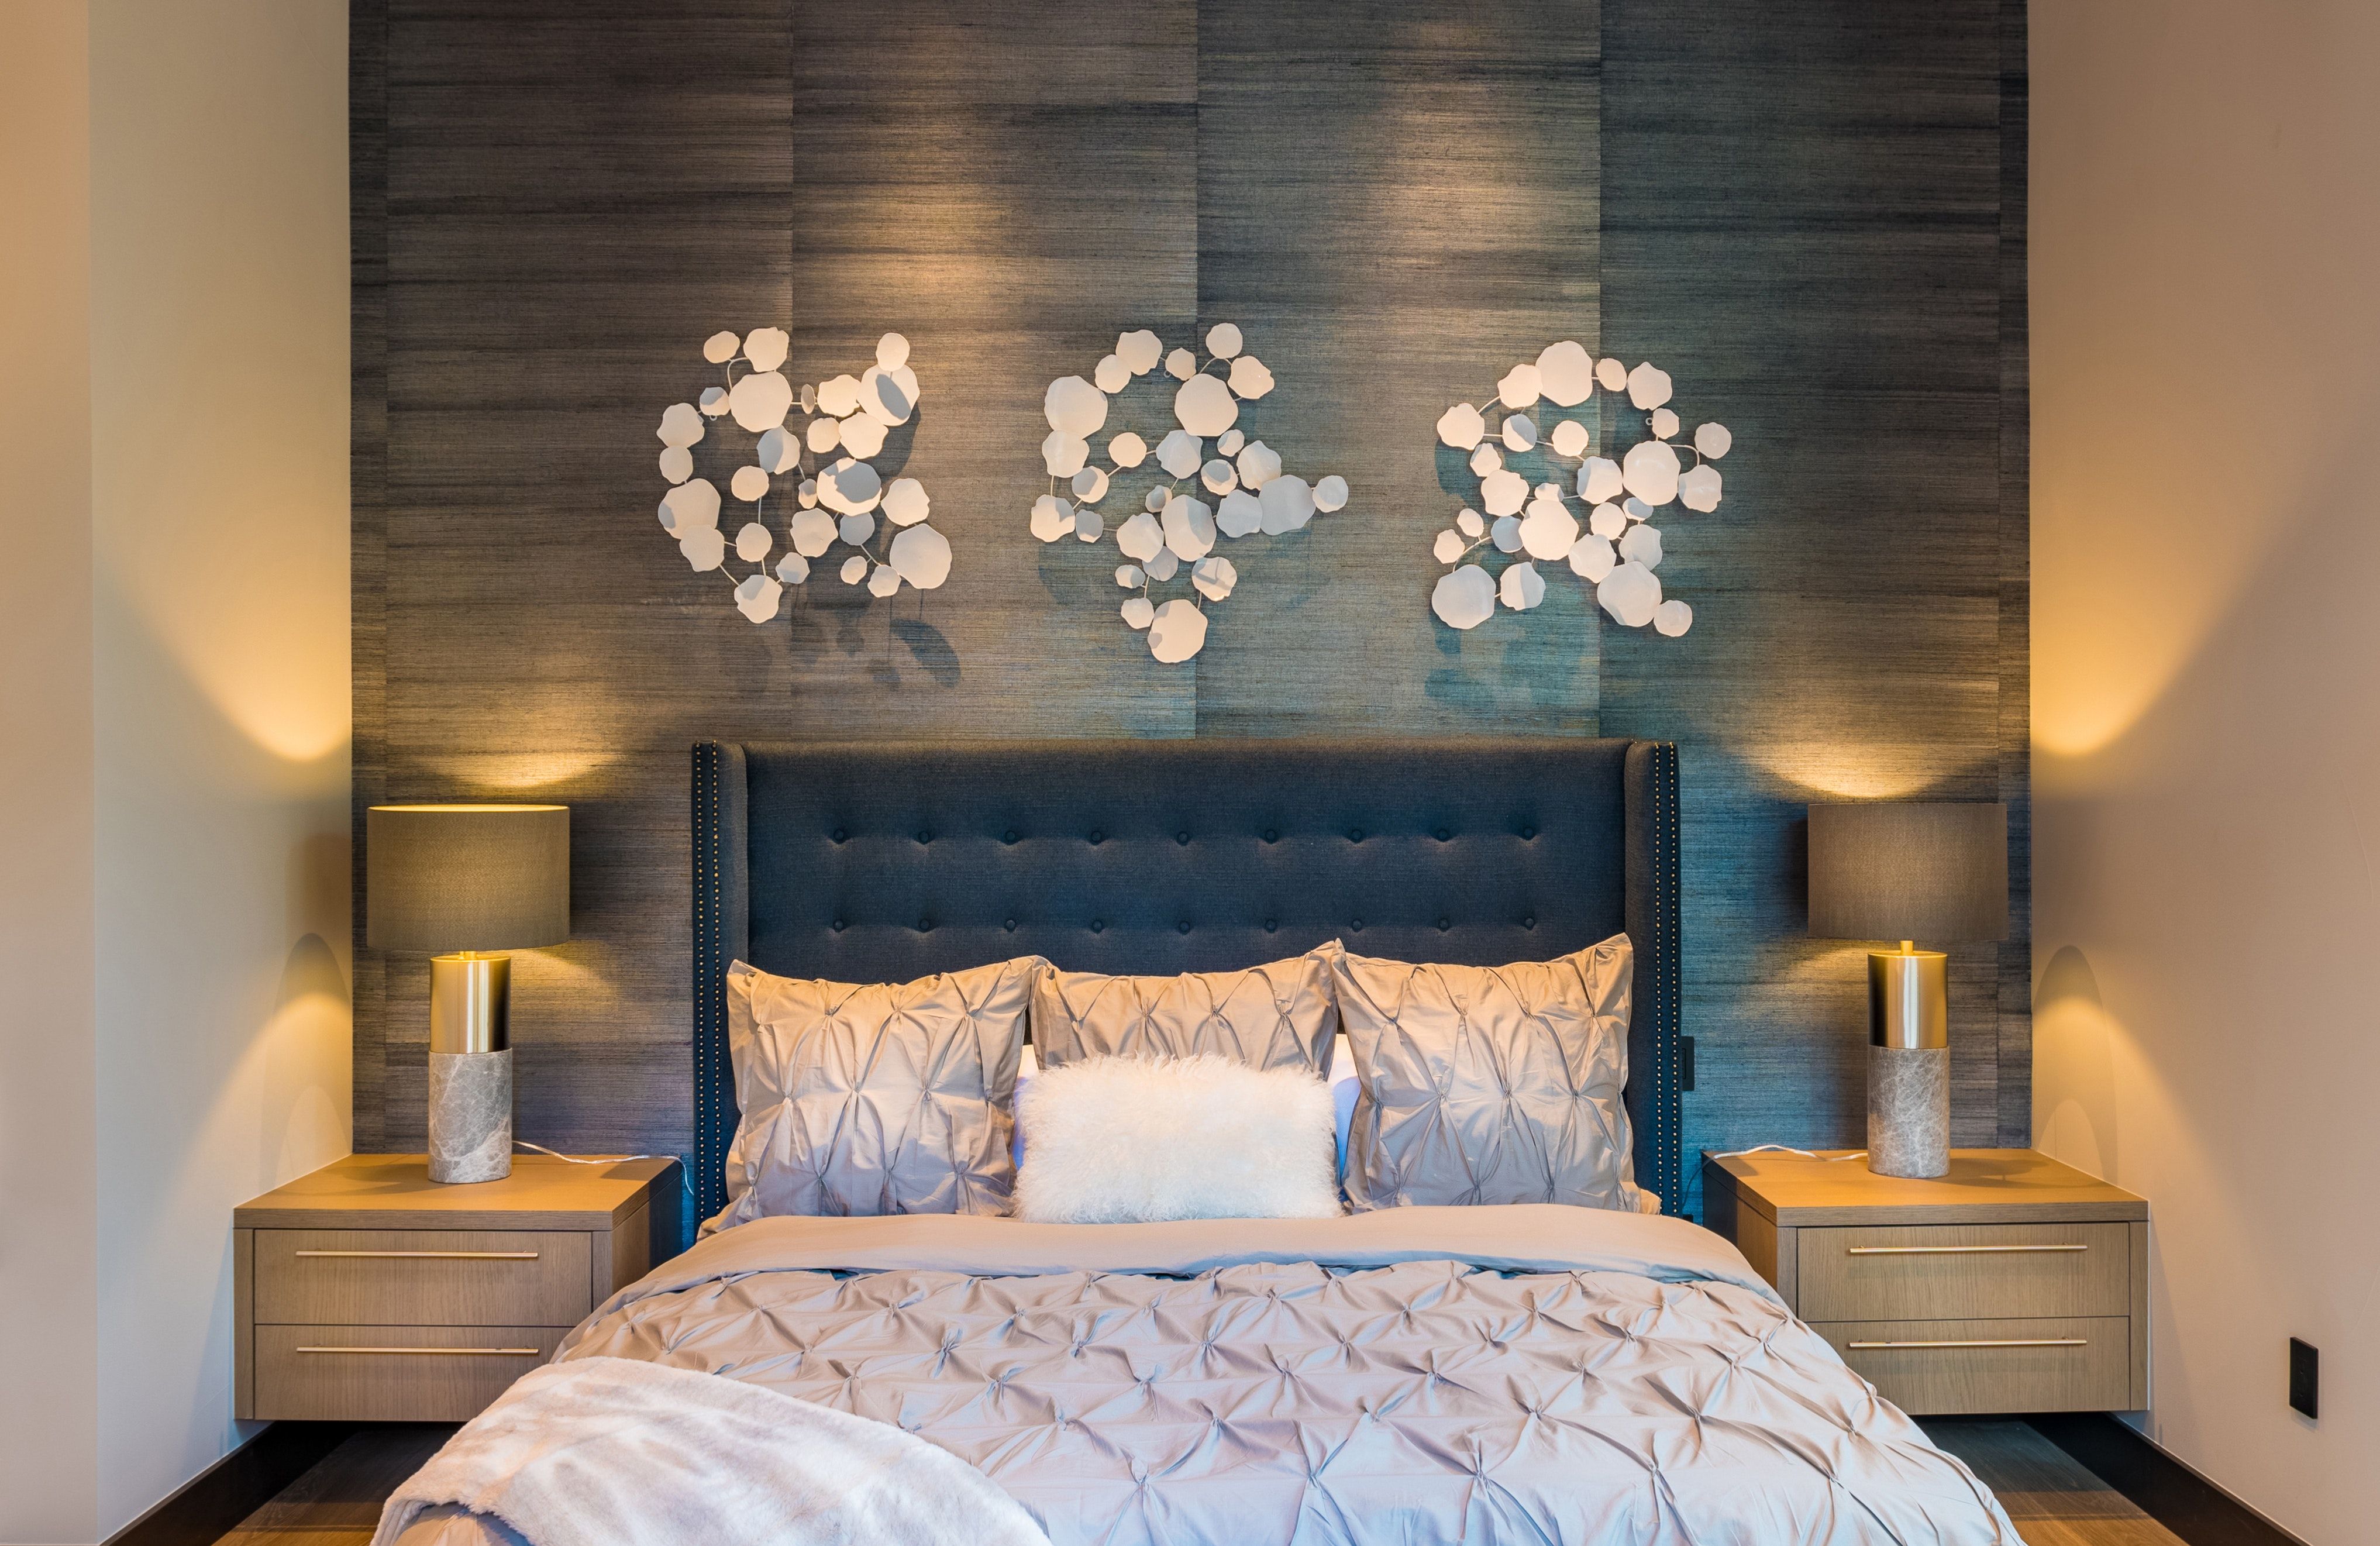 From Drab To Fab: Revamp Your Bedroom With Creative Accent Wall Designs